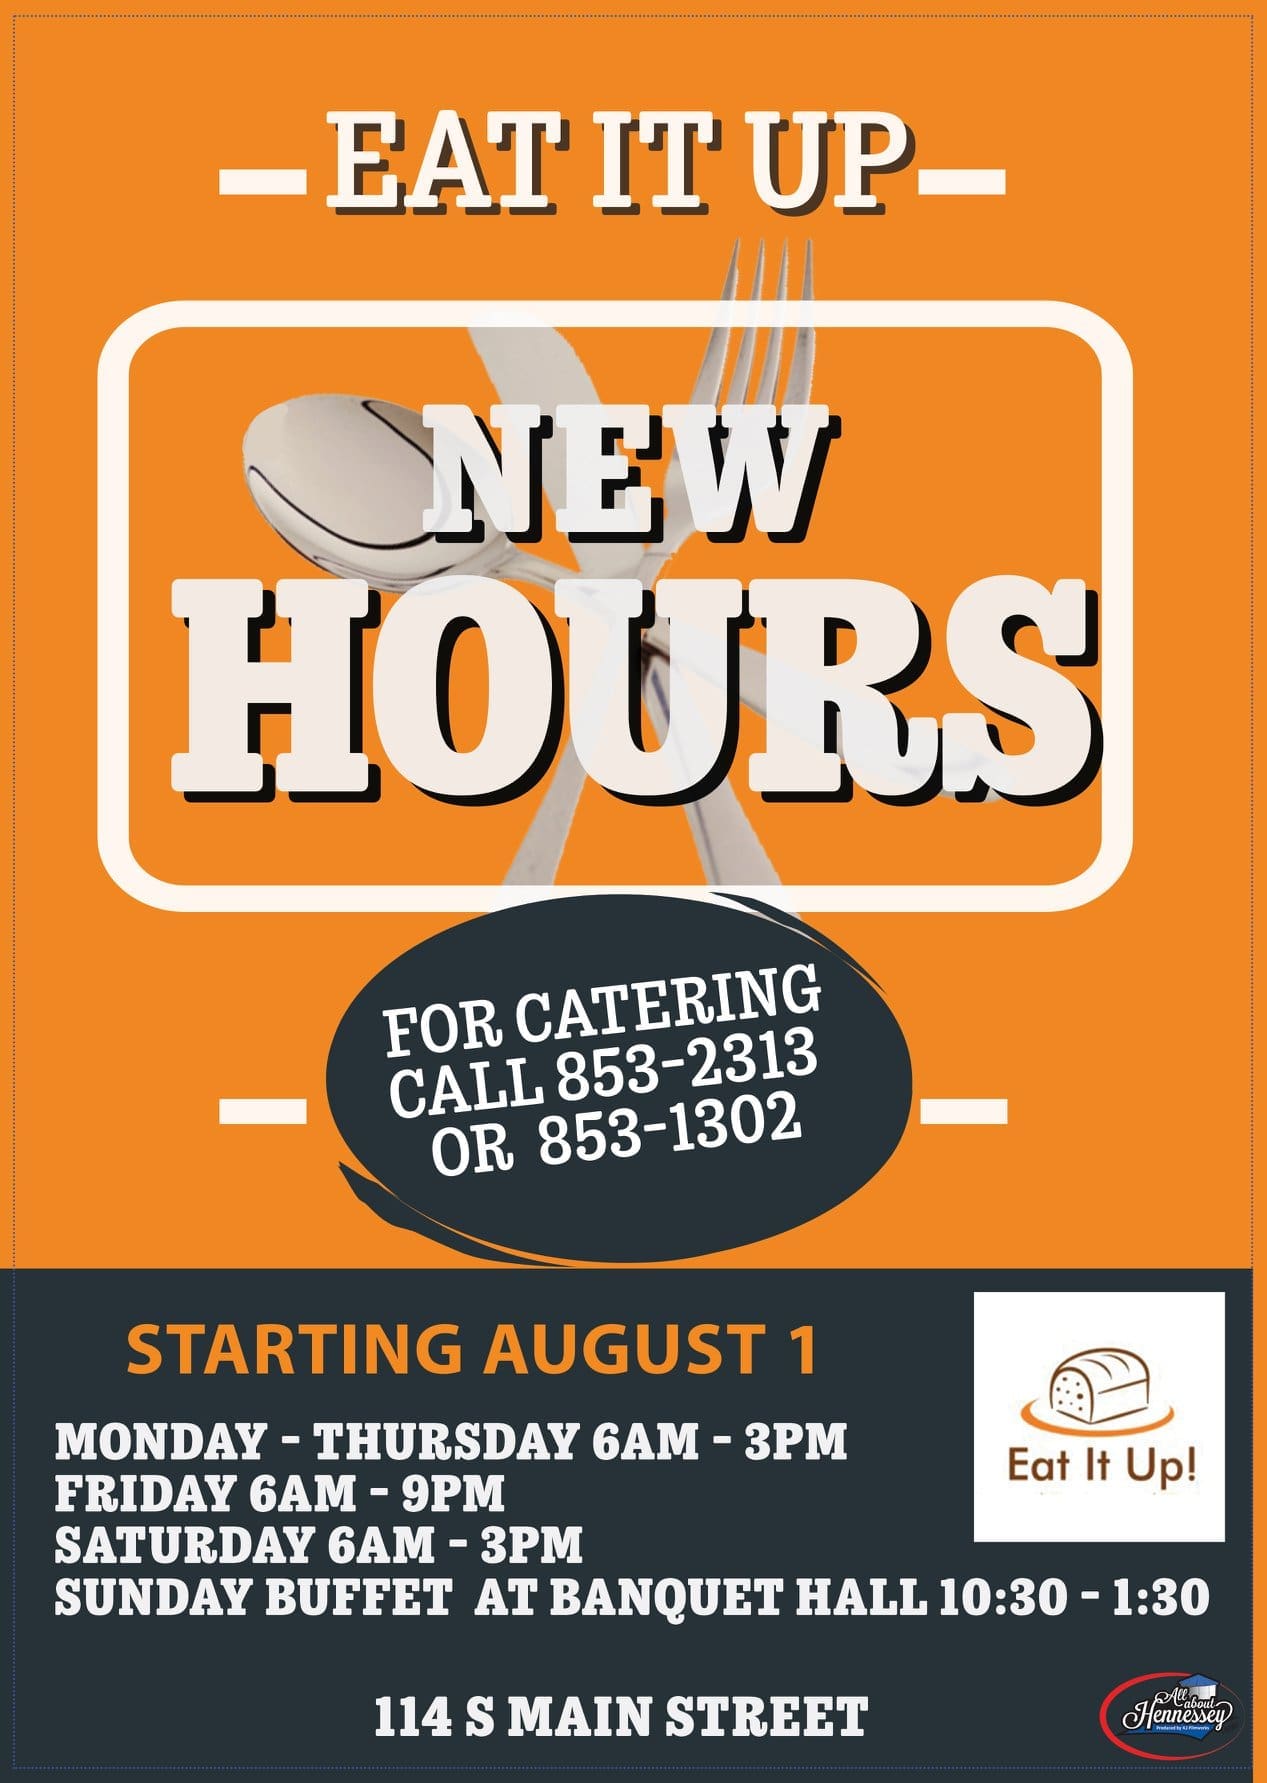 EAT IT UP WILL HAVE NEW HOURS STARTING AUGUST 1!